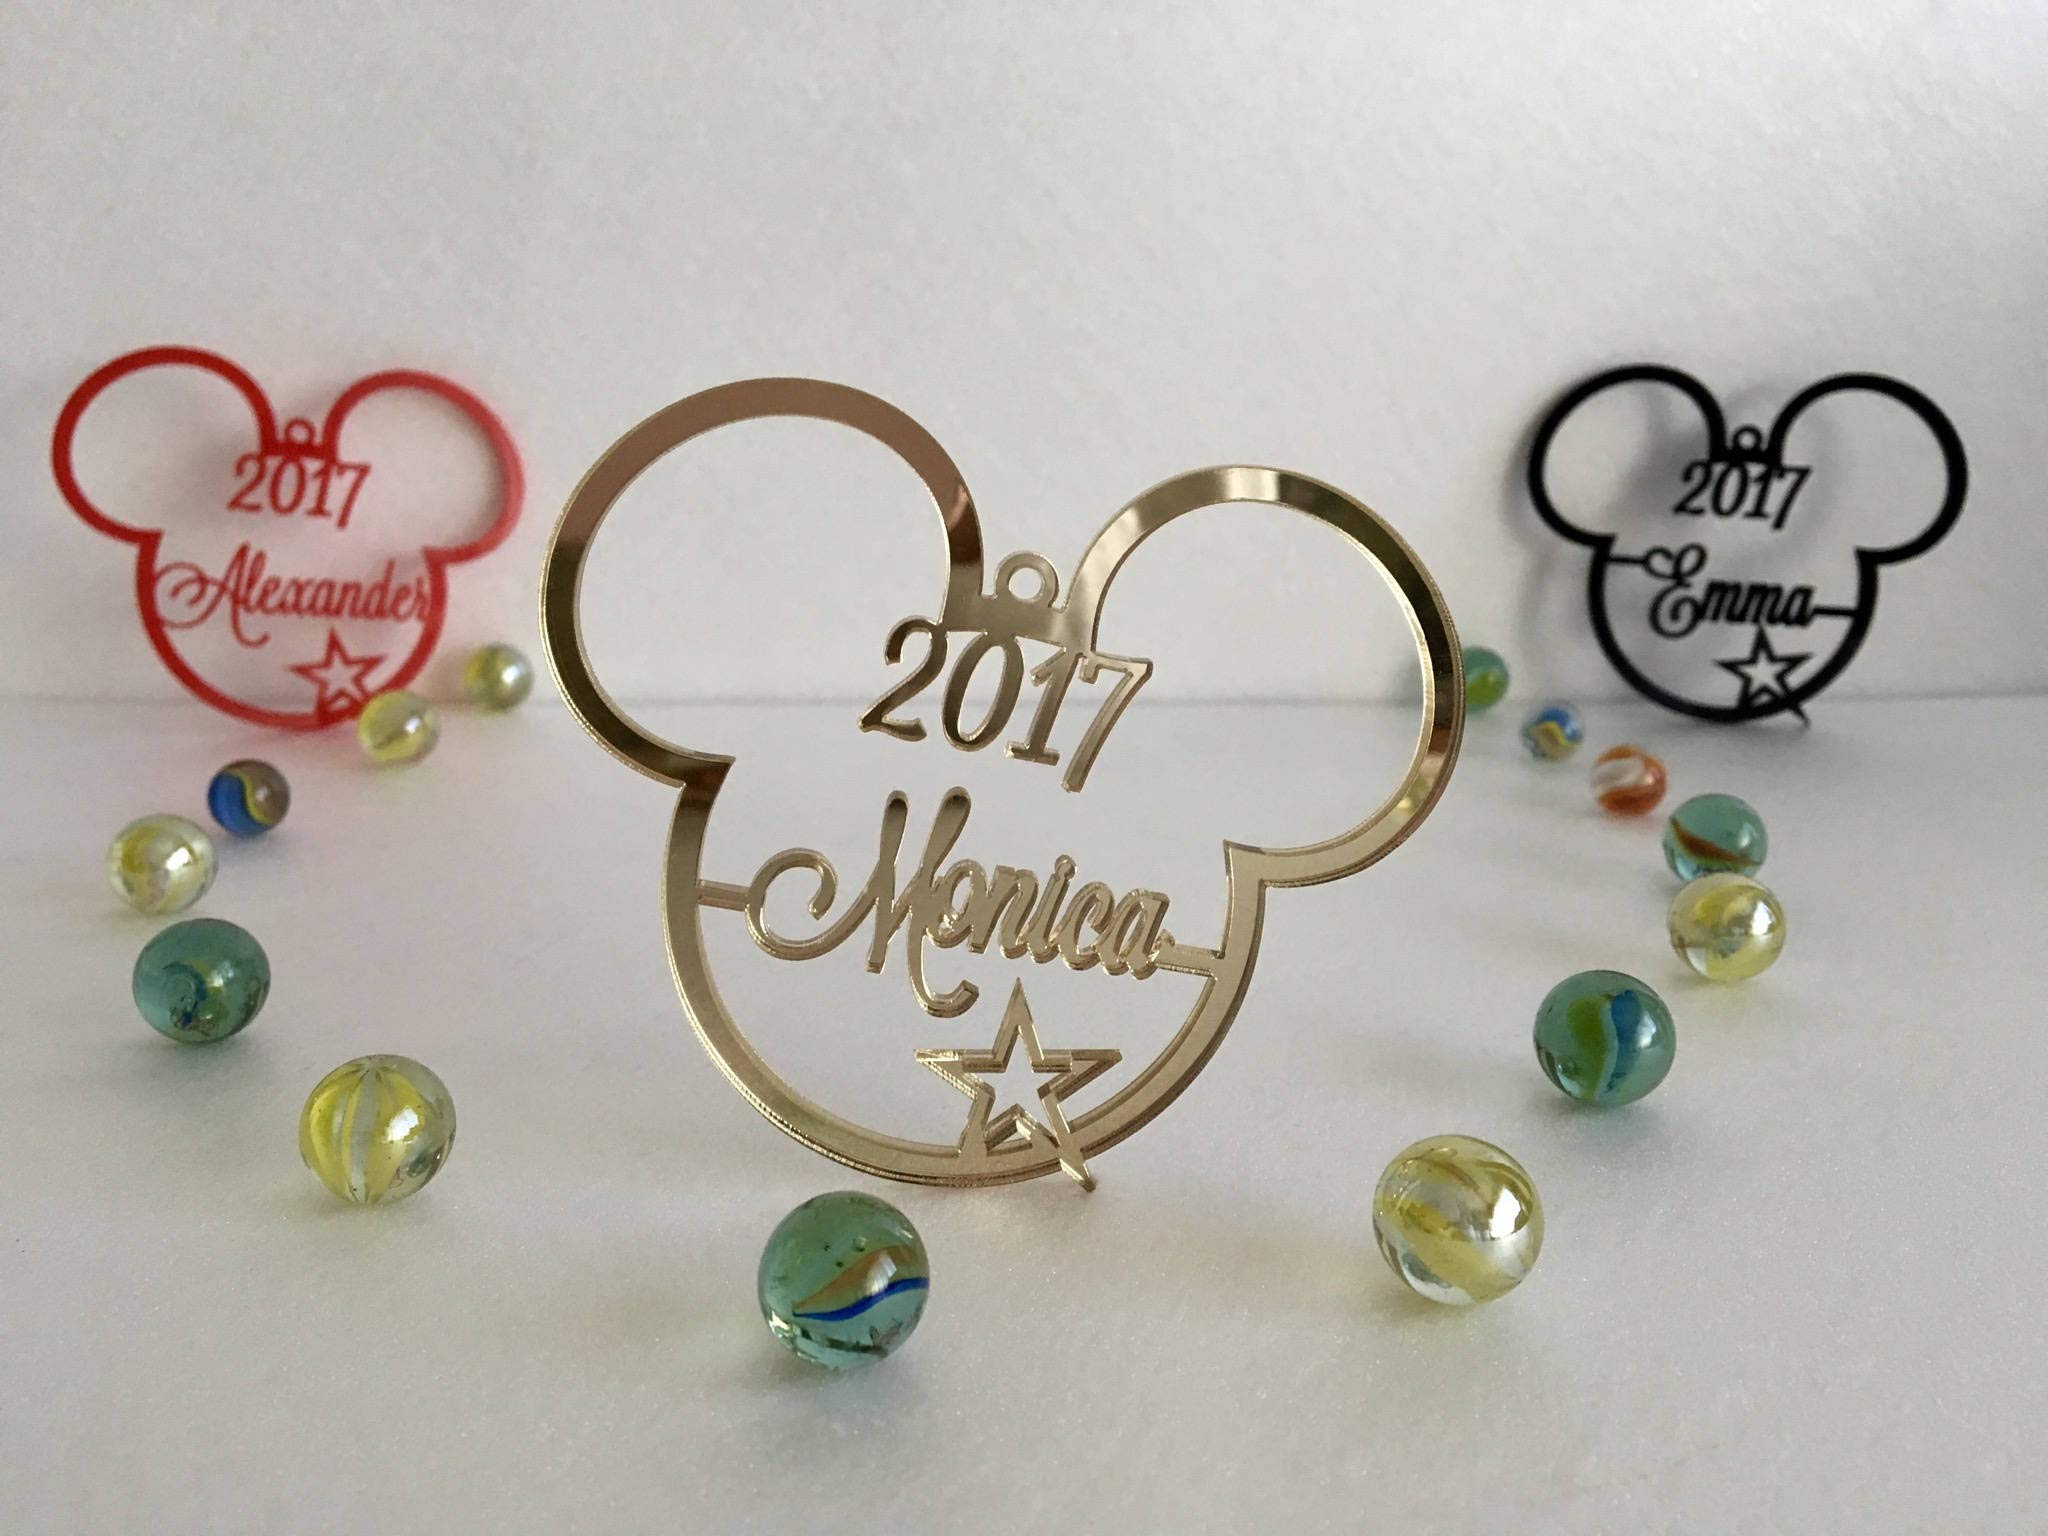 Mickey Mouse Christmas Tree Decoration 2023 Ornament Personalized Name Bauble Disney Party Favor Decor 1st Xmas 2024 Gift for Kids First Birthday Decor Hanging Cute Minnie Mouse Head Acrylic Ornaments